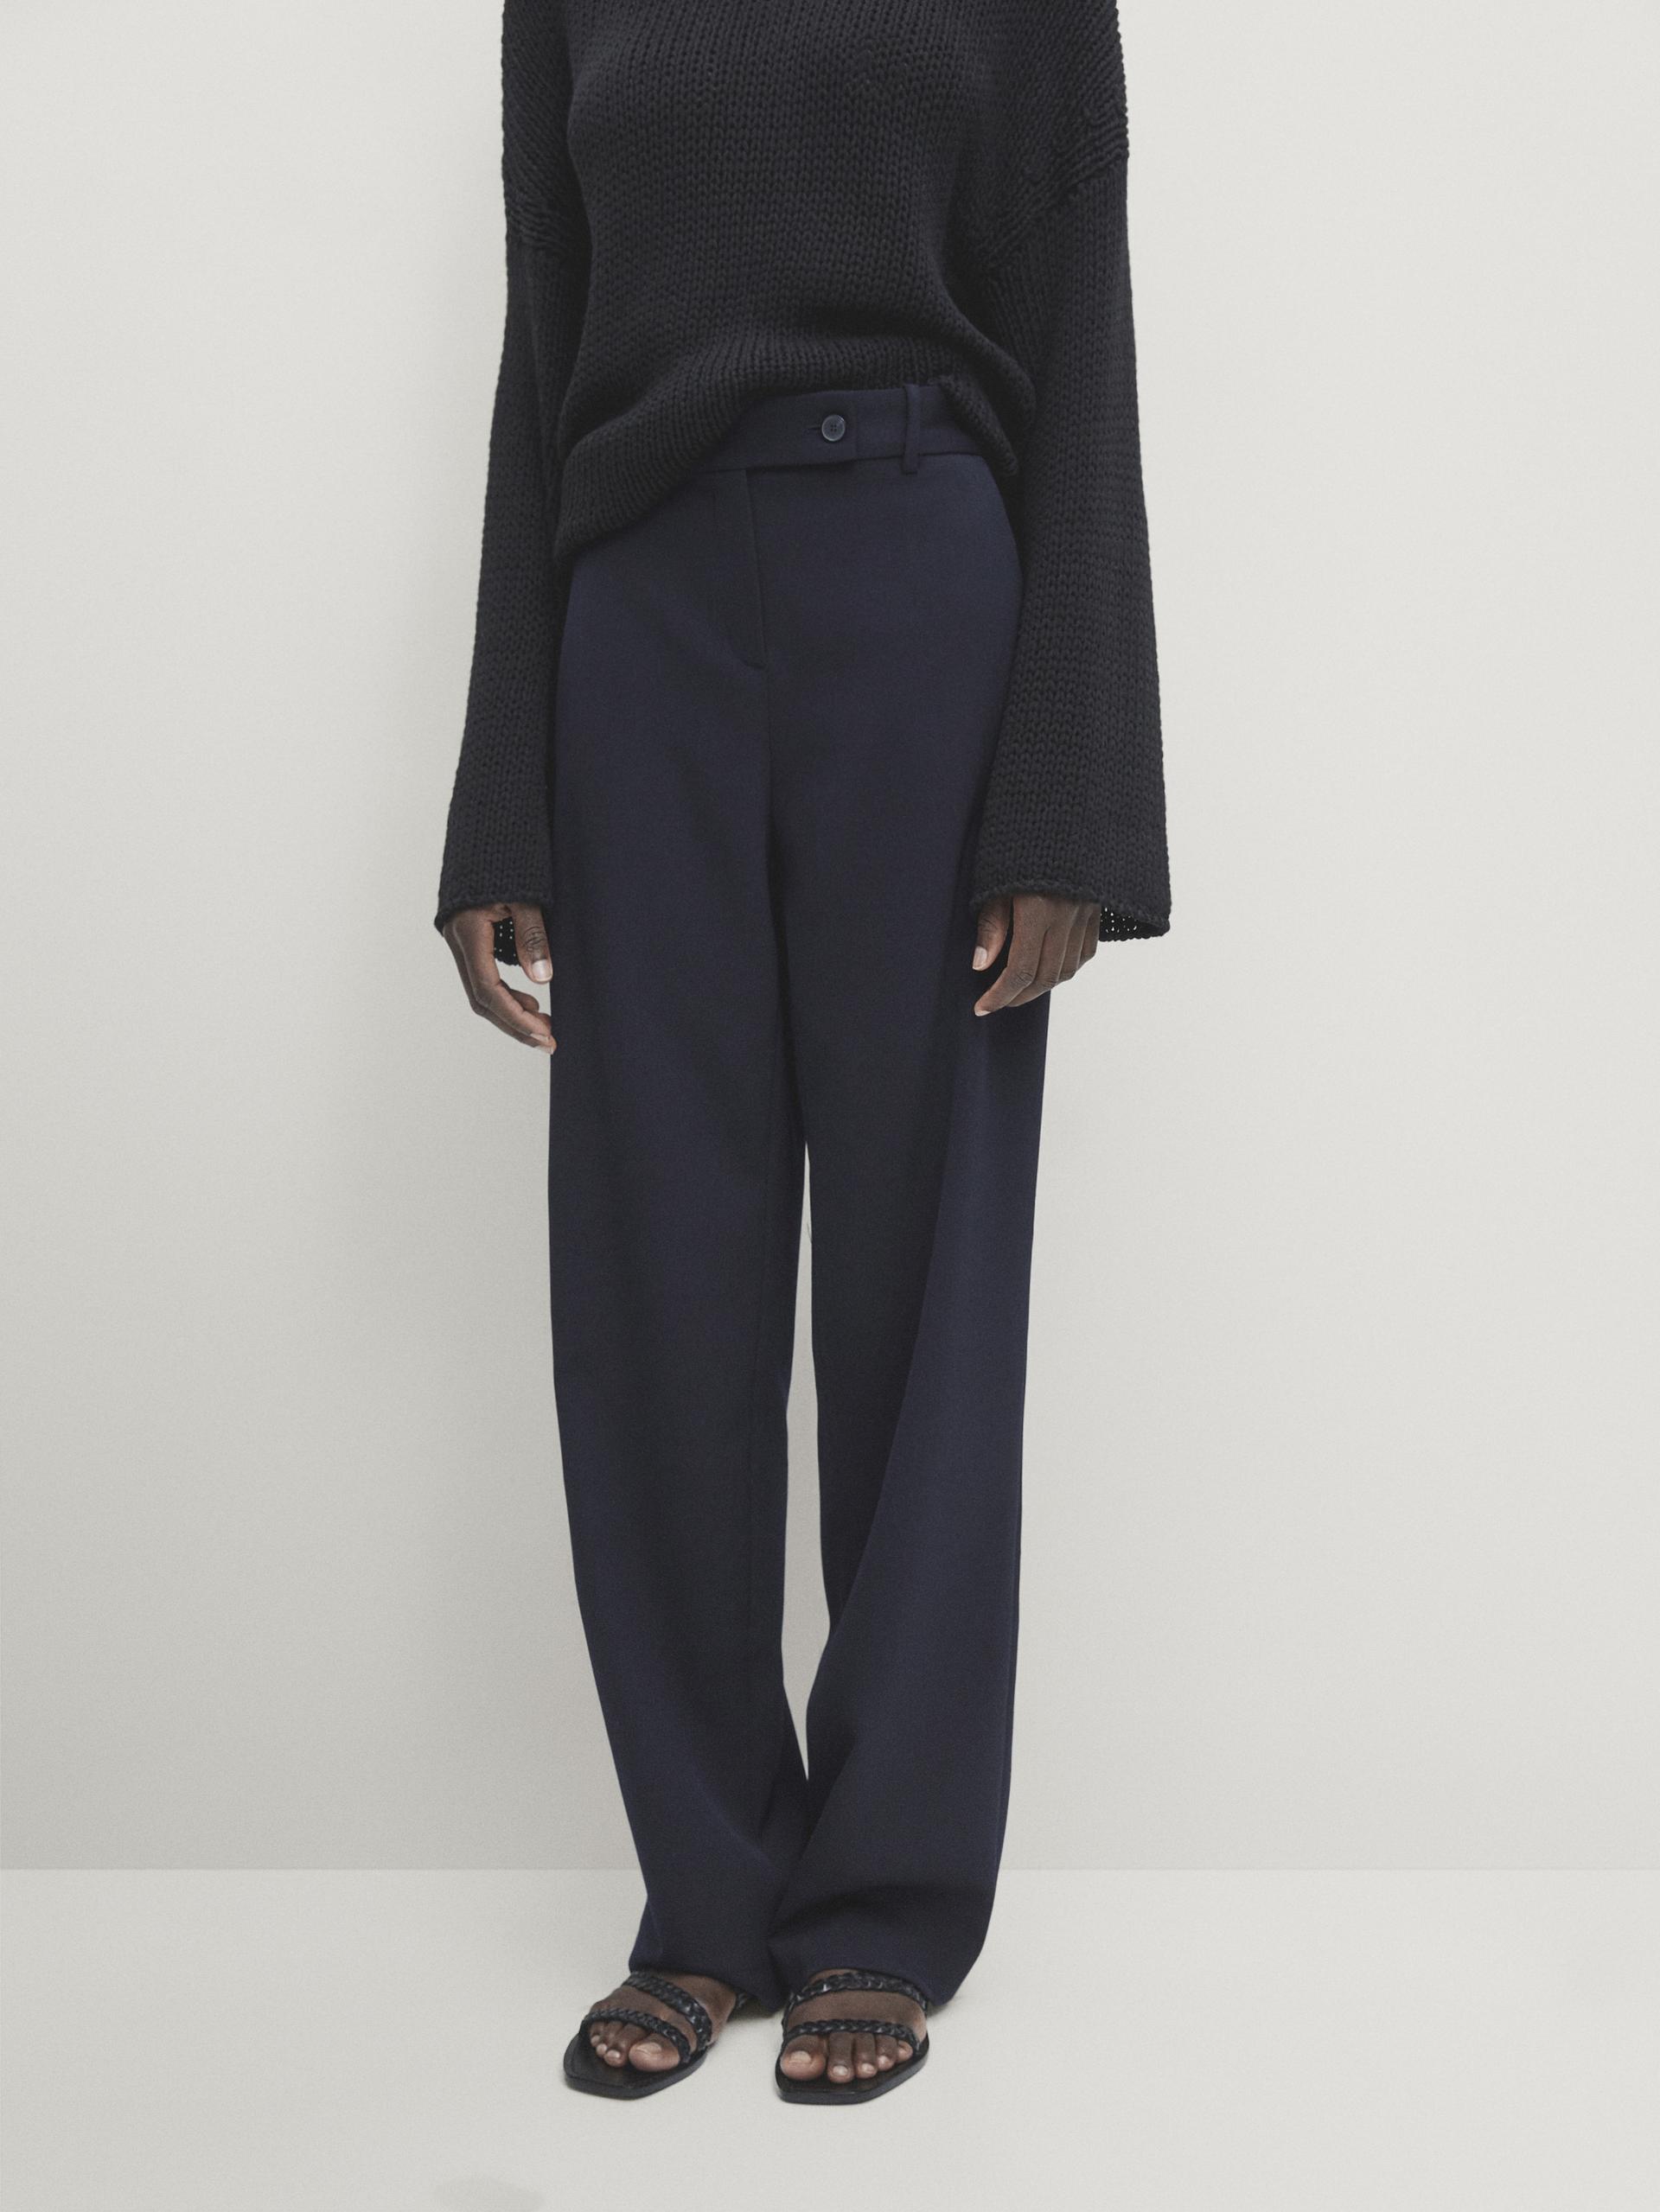 Straight-fit plain navy blue trousers - Navy blue